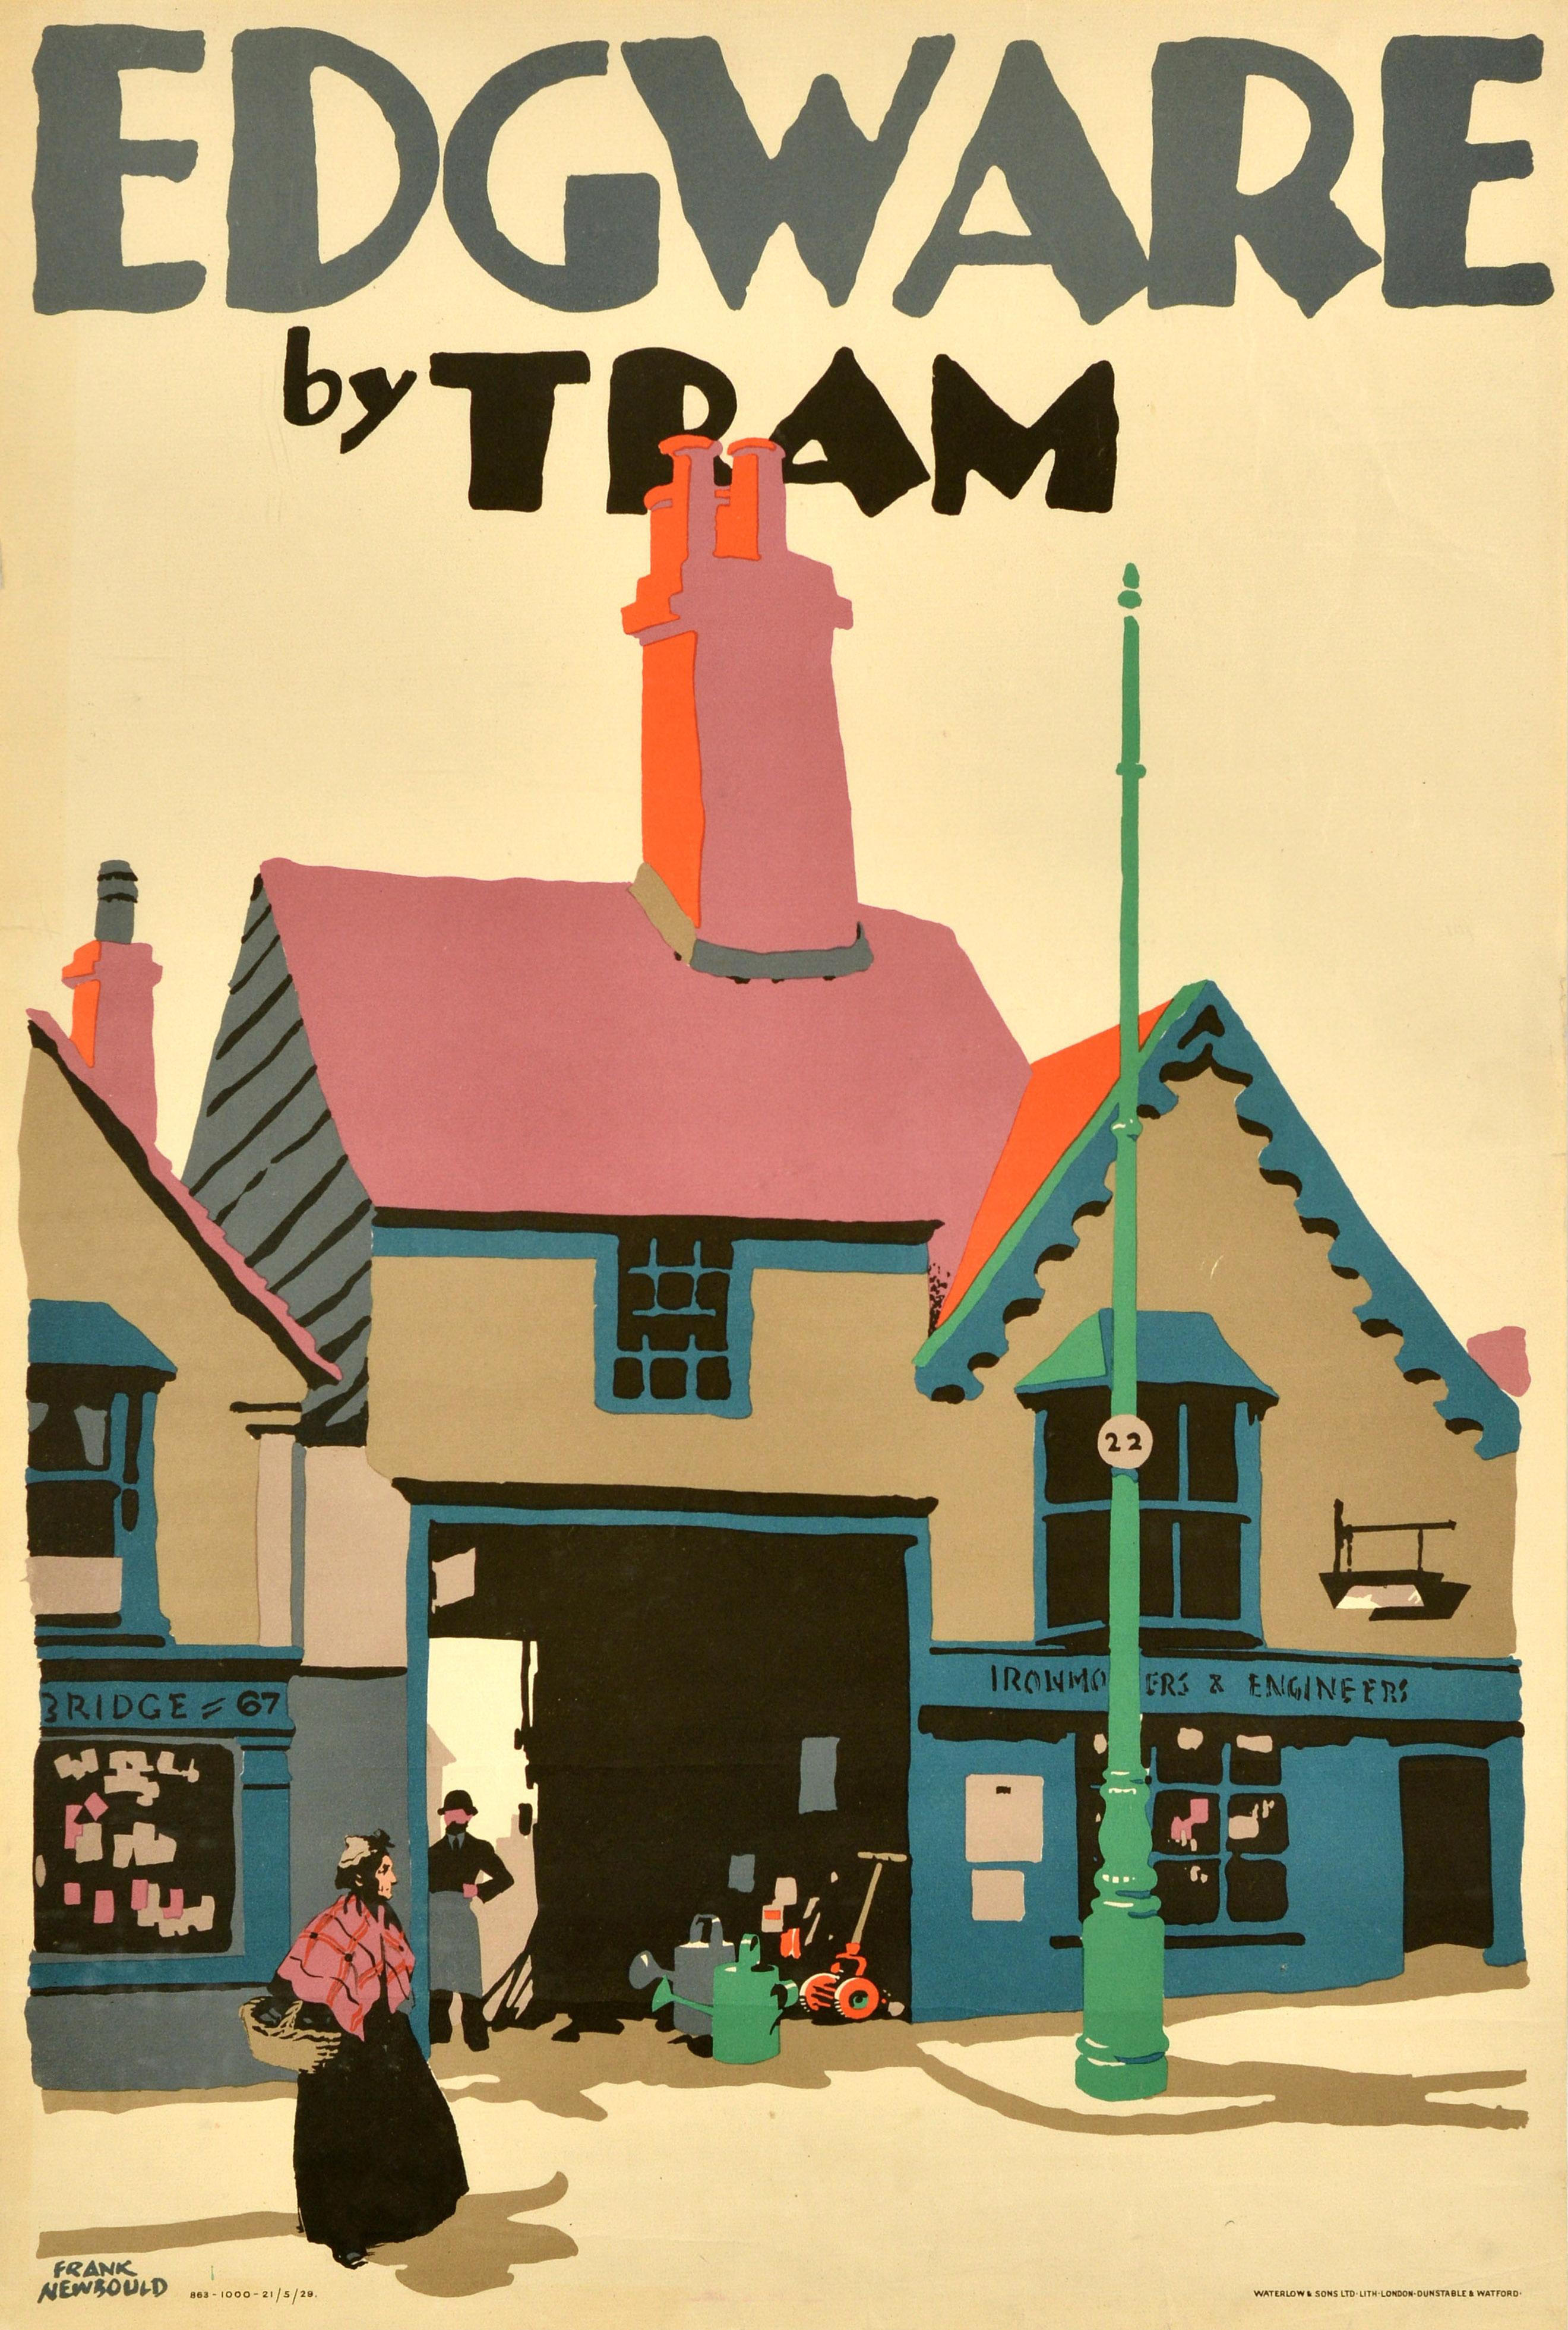 Original vintage travel poster - Edgware by Tram - featuring a colourful image by the notable British poster artist Frank Newbould (1887-1951) depicting a lady wearing a shawl and carrying a basket in front of shop buildings, one number 67 and